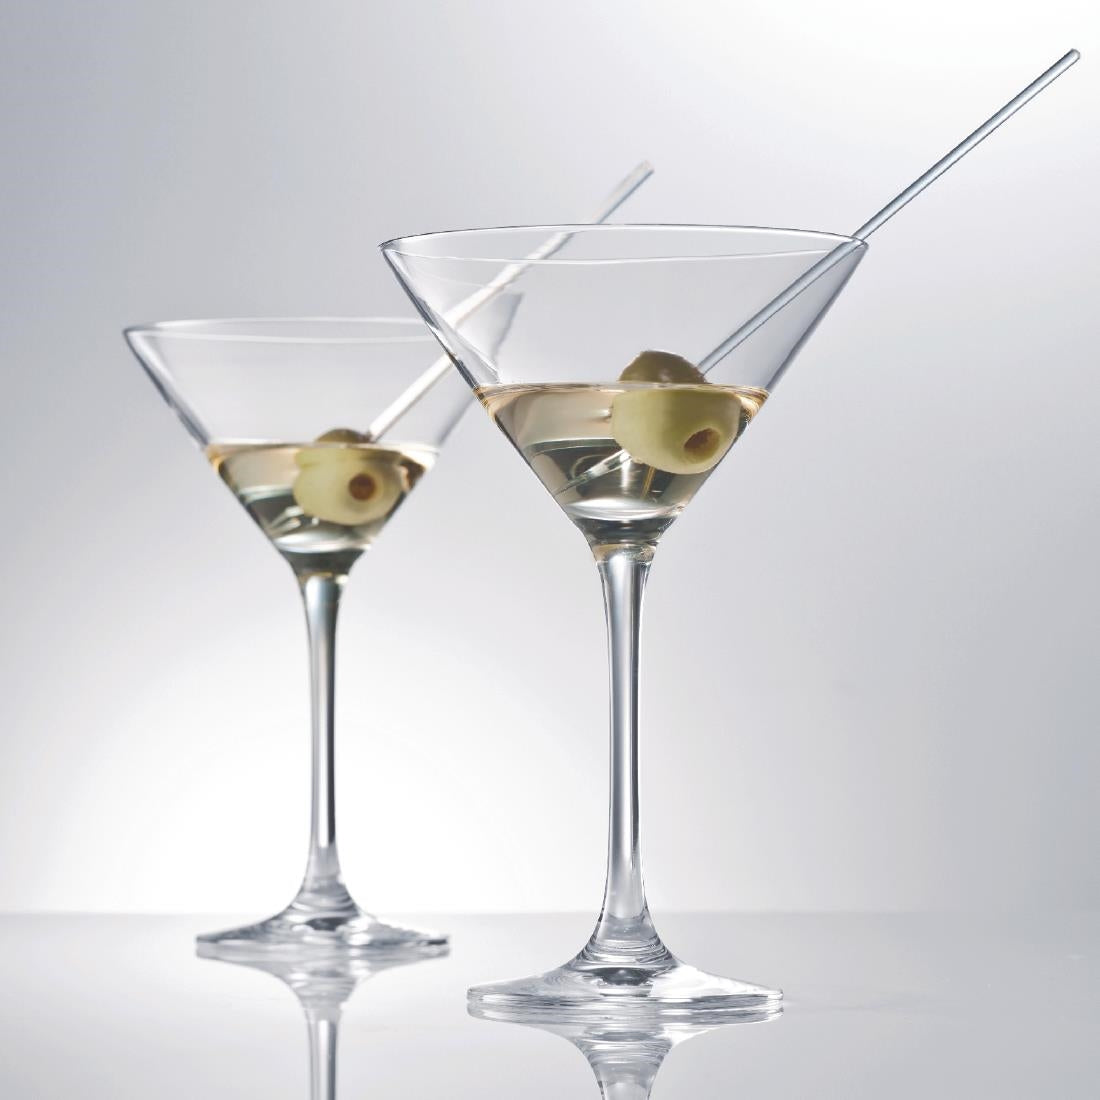 CC685 Schott Zwiesel Classico Crystal Martini Glasses 270ml (Pack of 6)